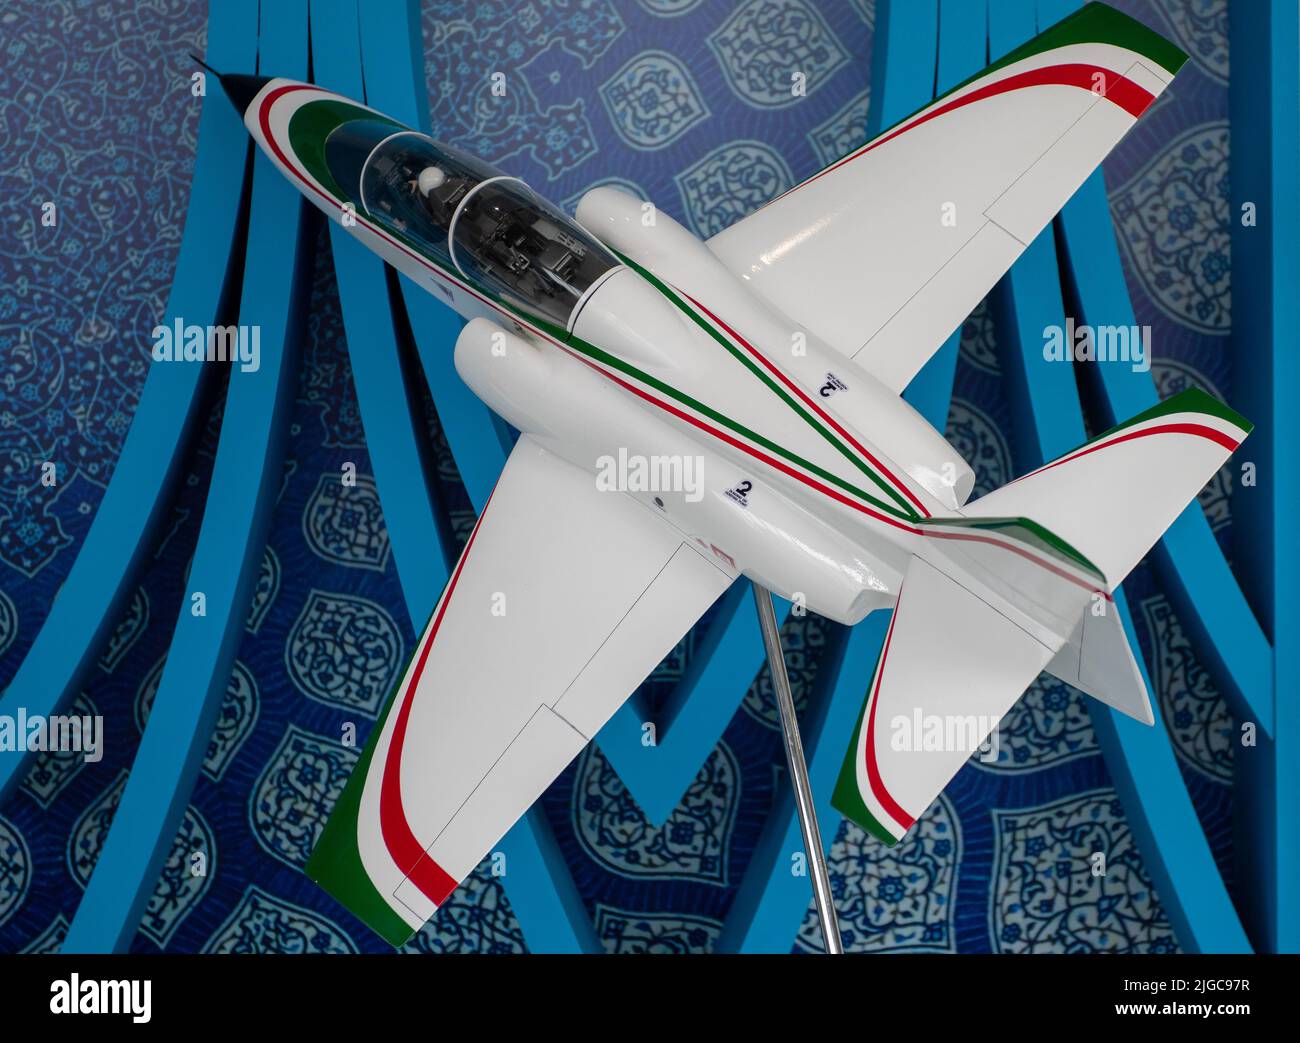 August 30, 2019, Moscow region, Russia. Mock-up of the Iranian training aircraft HESA Yasin Stock Photo